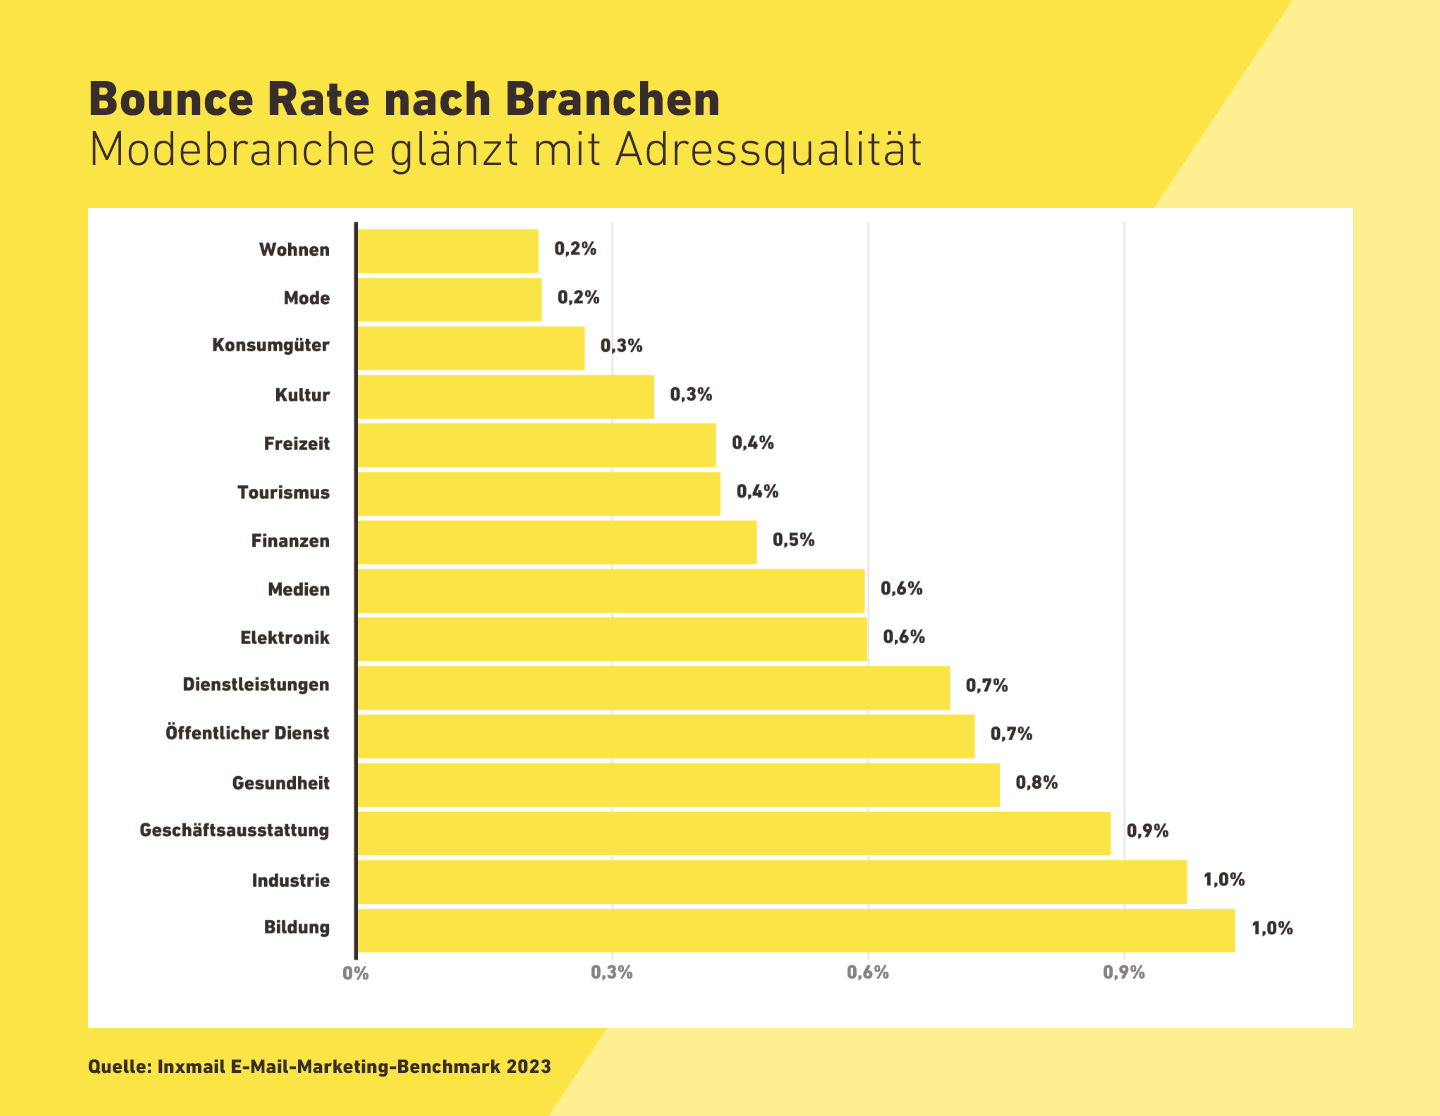 Inxmail E-Mail-Marketing-Benchmark 2023: Bounce Rate nach Branchen